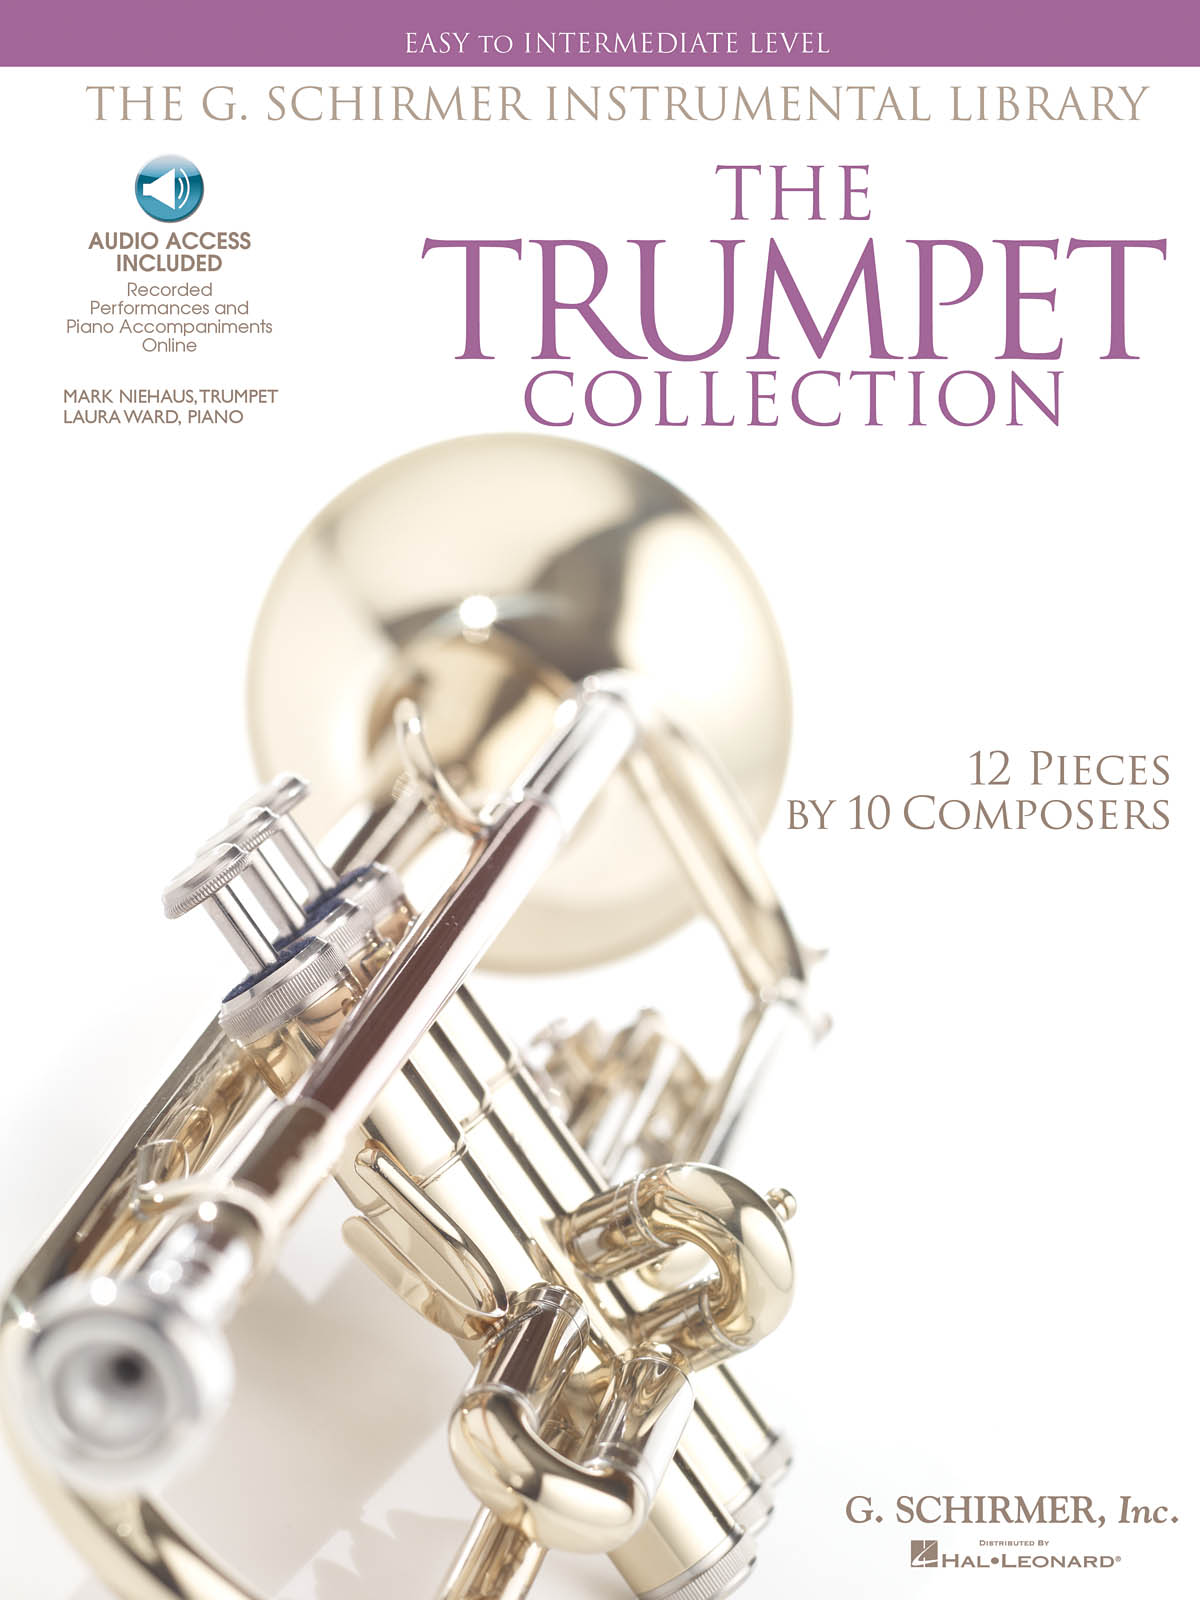 The Trumpet Collection - Easy to Intermediate Level / G. Schirmer Instrumental Library